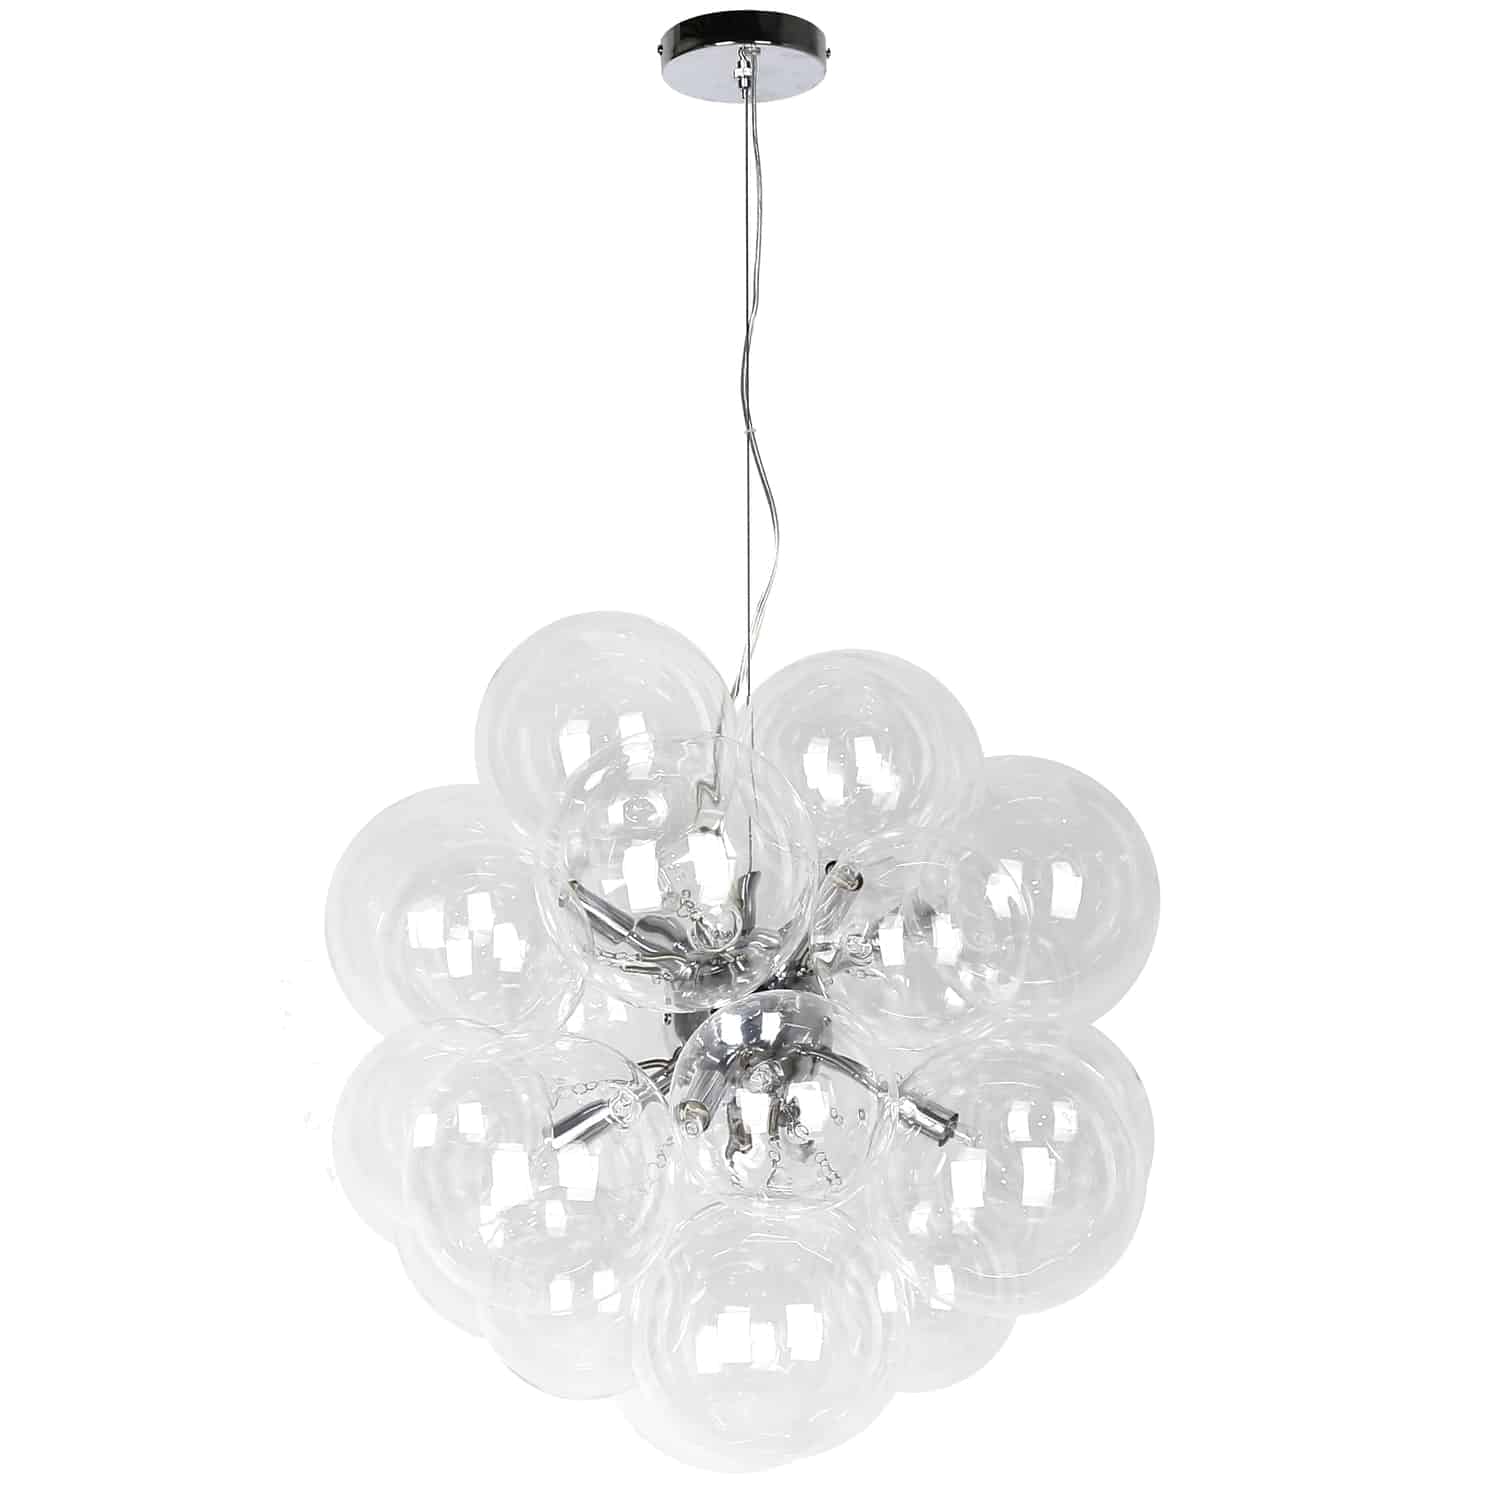 6 Light Halogen Pendant Polished Chrome Finish with Clear Glass